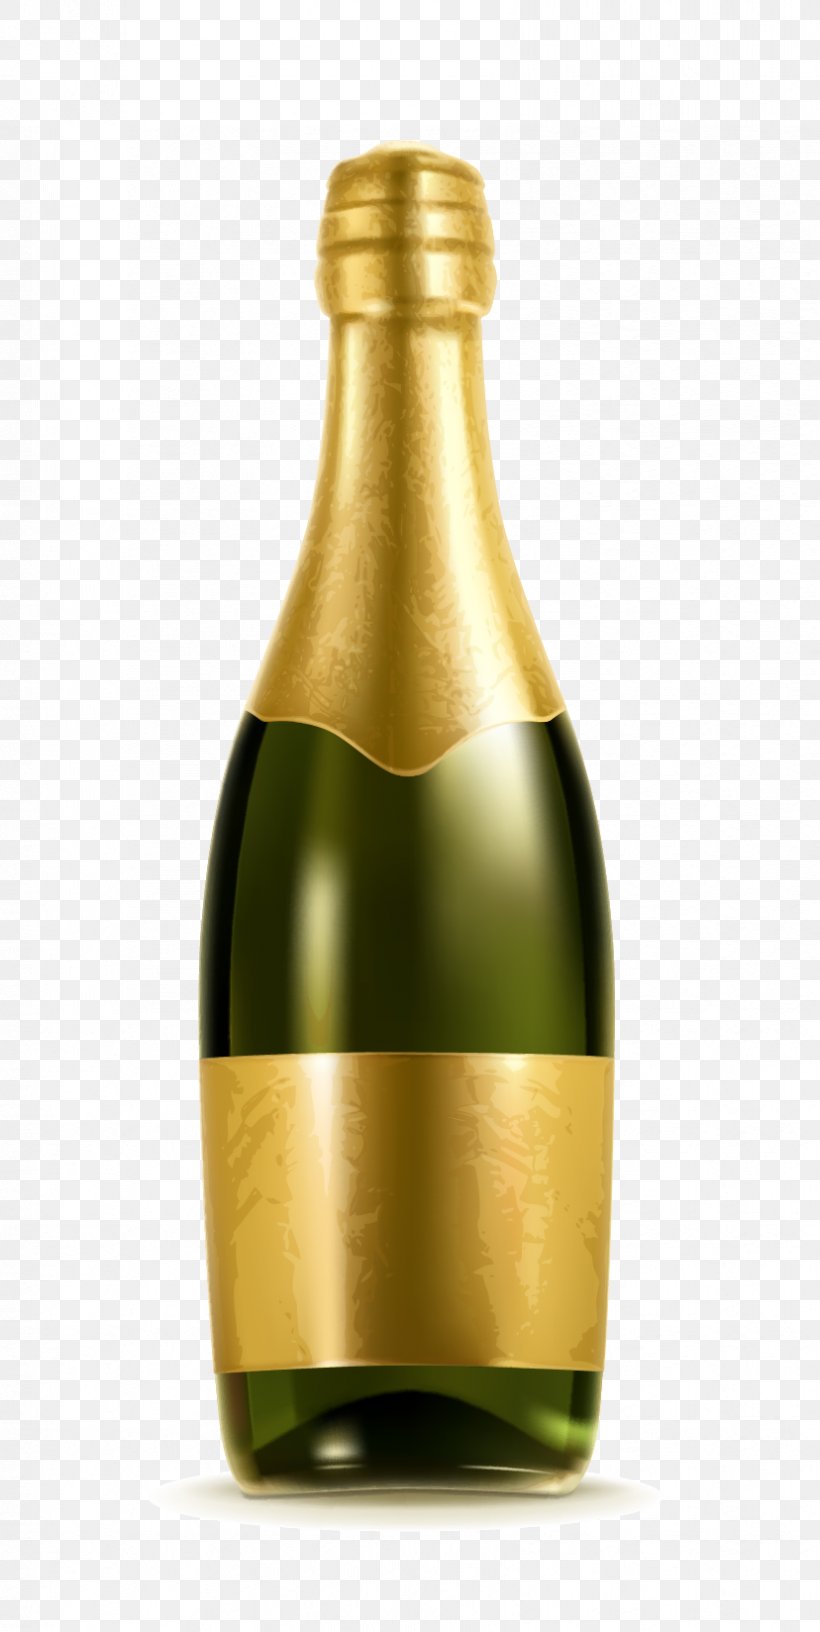 Champagne Bottle Alcoholic Beverage Illustration, PNG, 828x1648px, Champagne, Alcoholic Beverage, Bottle, Drink, Glass Download Free